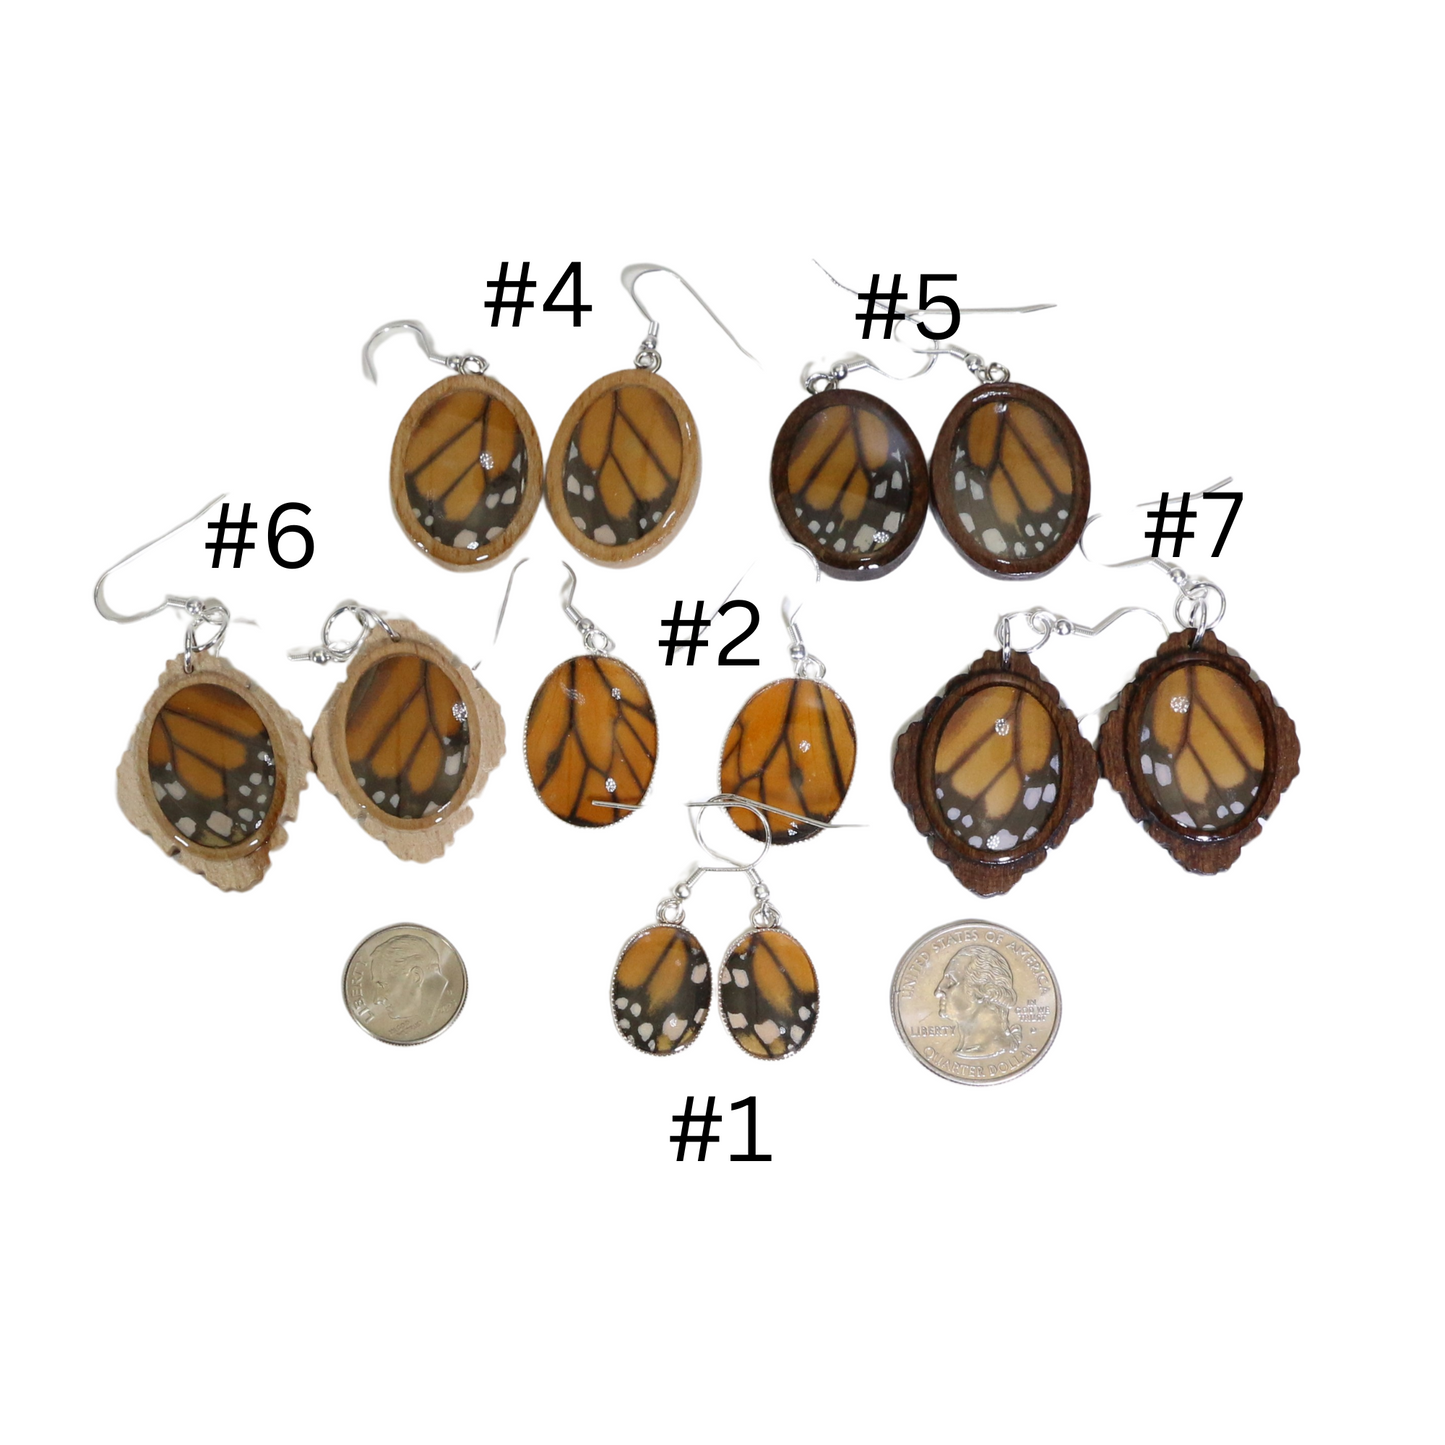 51004 - Real Butterfly Wing Jewelry - Earring Collection - Monarch Butterfly